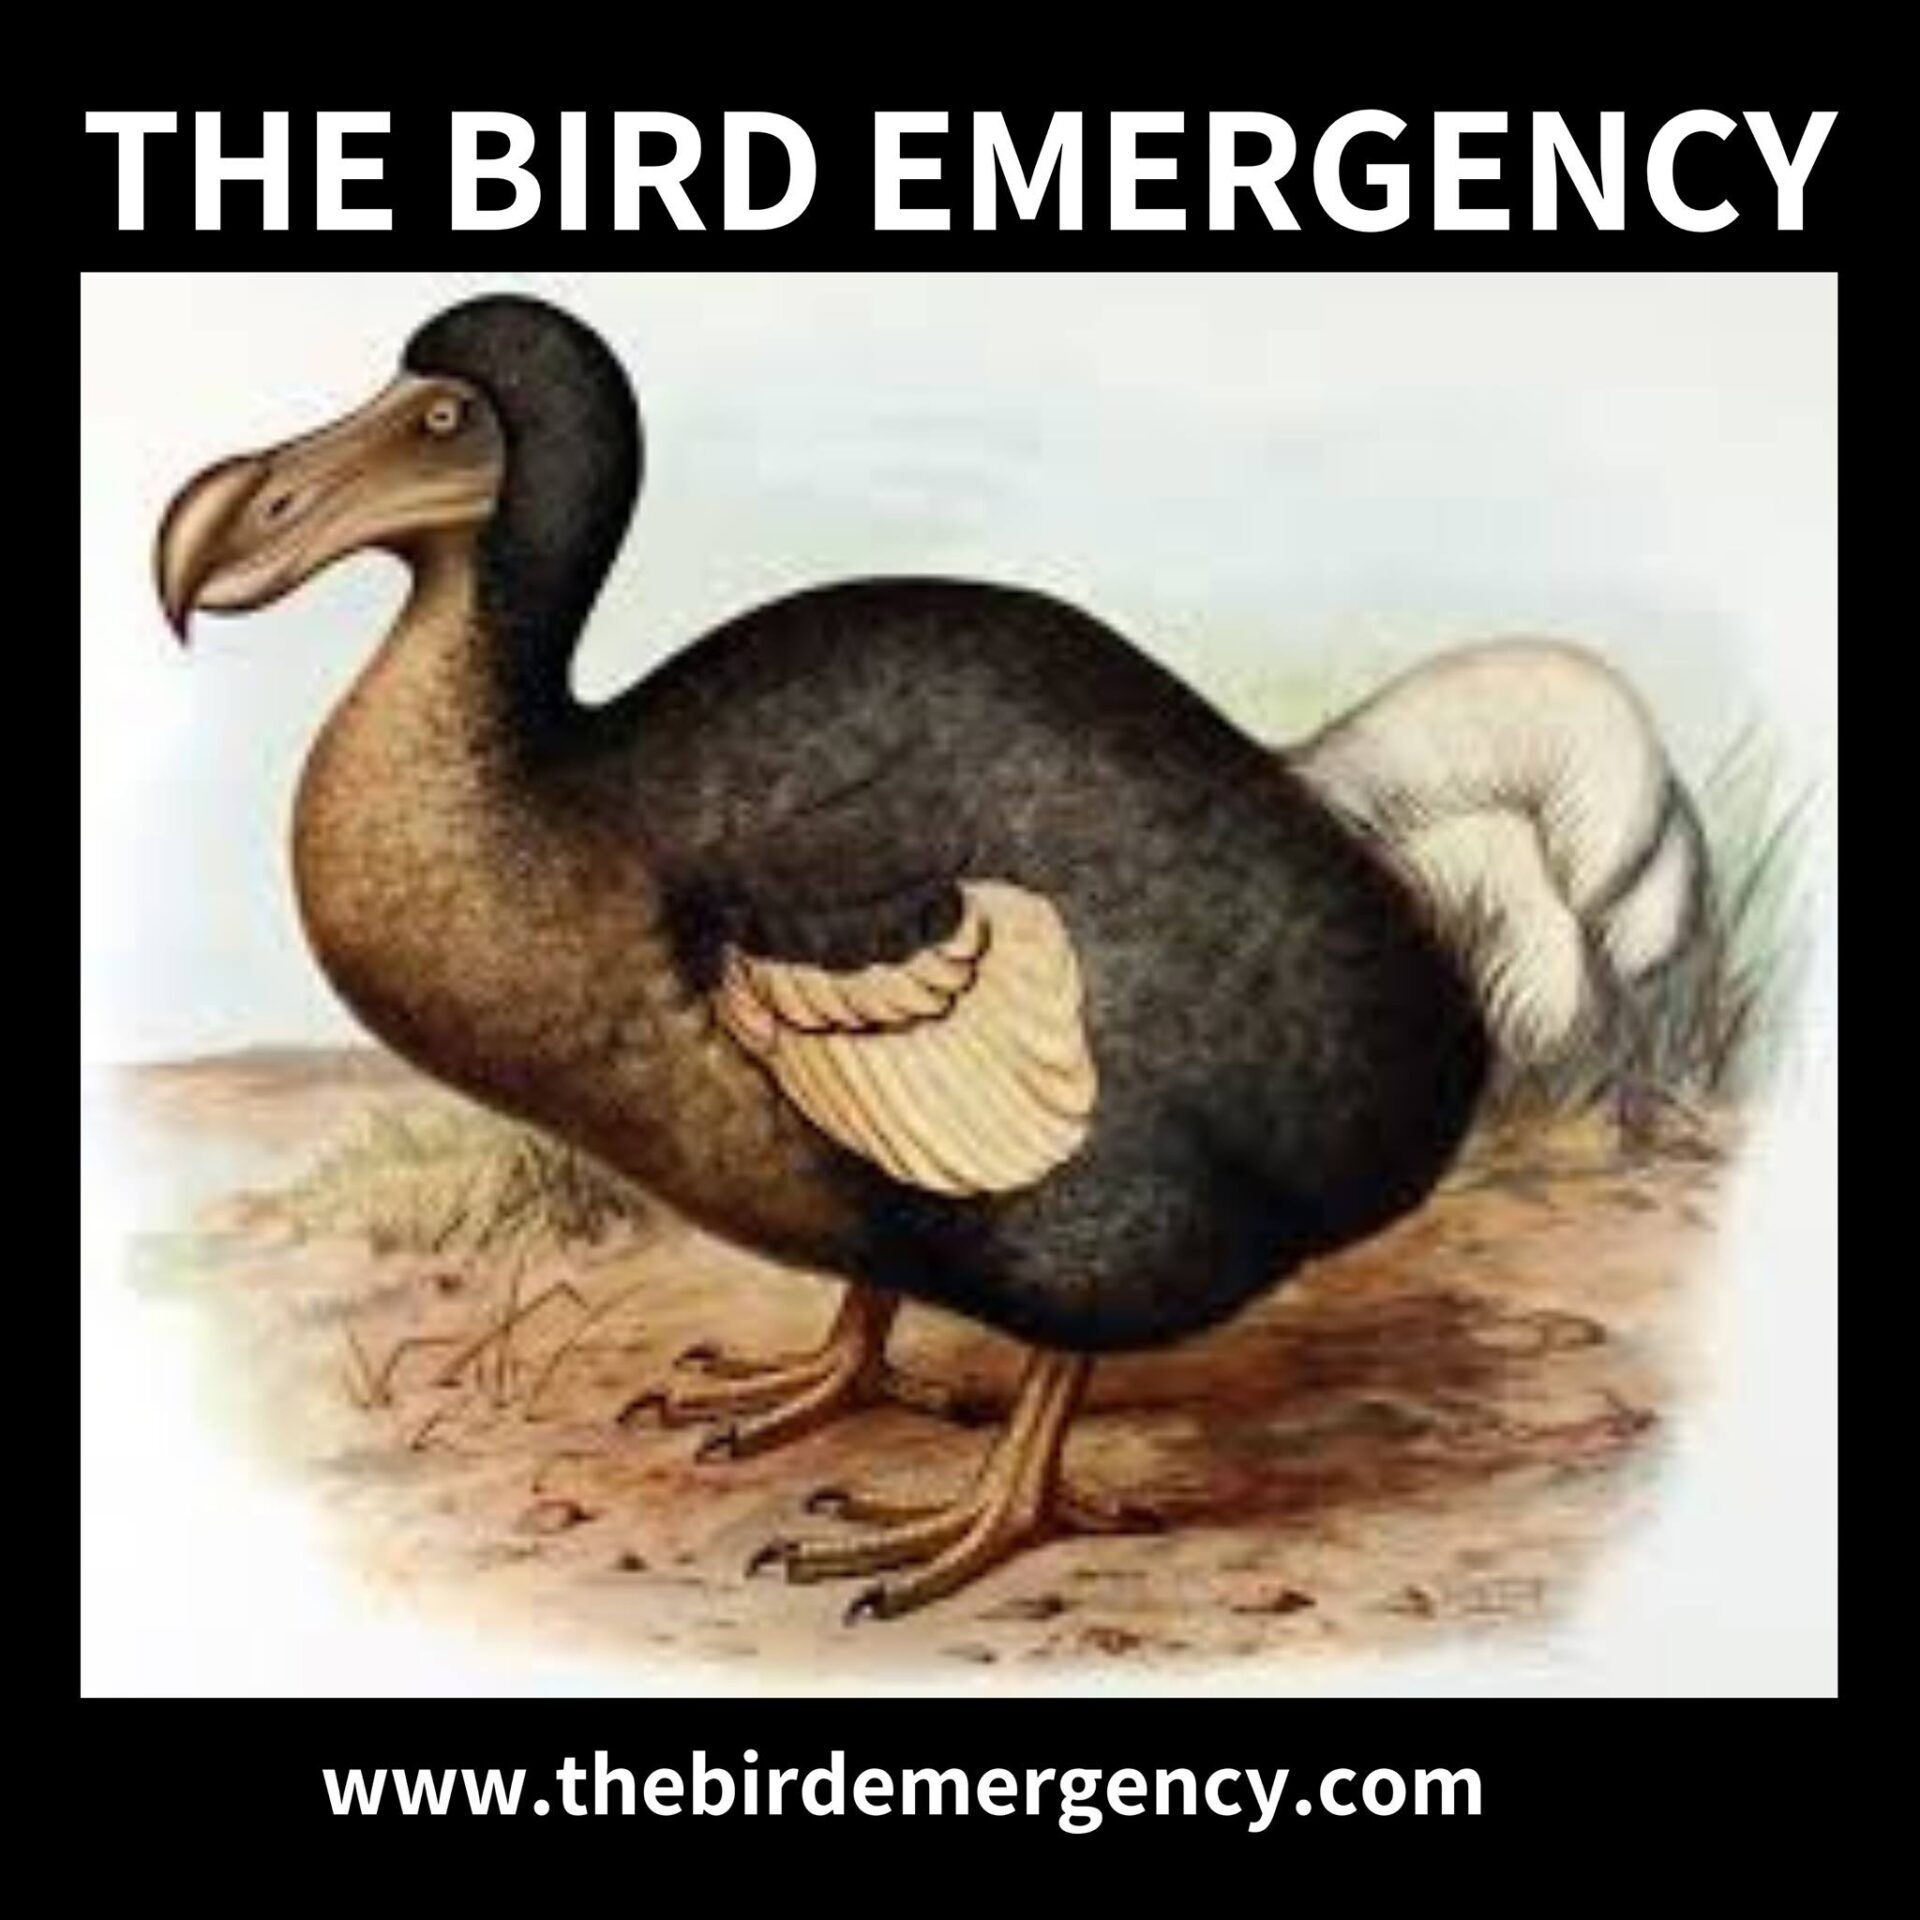 The Bird Emergency podcast logo, featuring a dodo and the website of the podcast